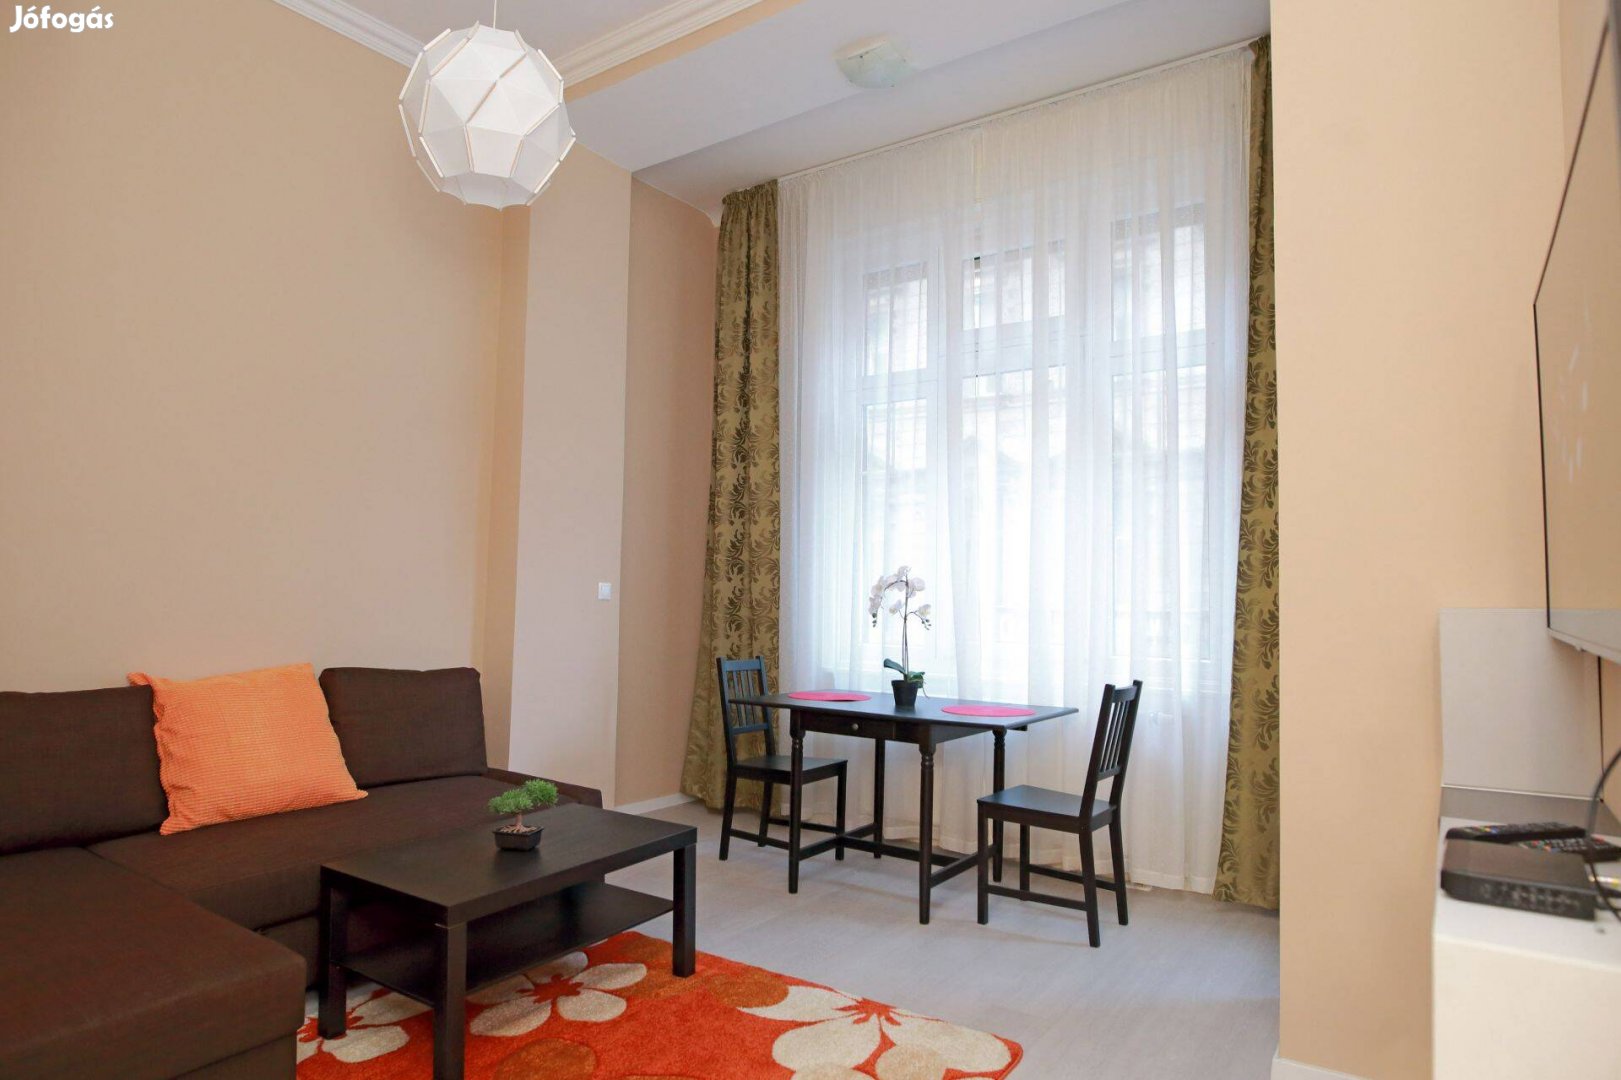 Apartment For Rent Close to The University of Veterinary Medicine Buda